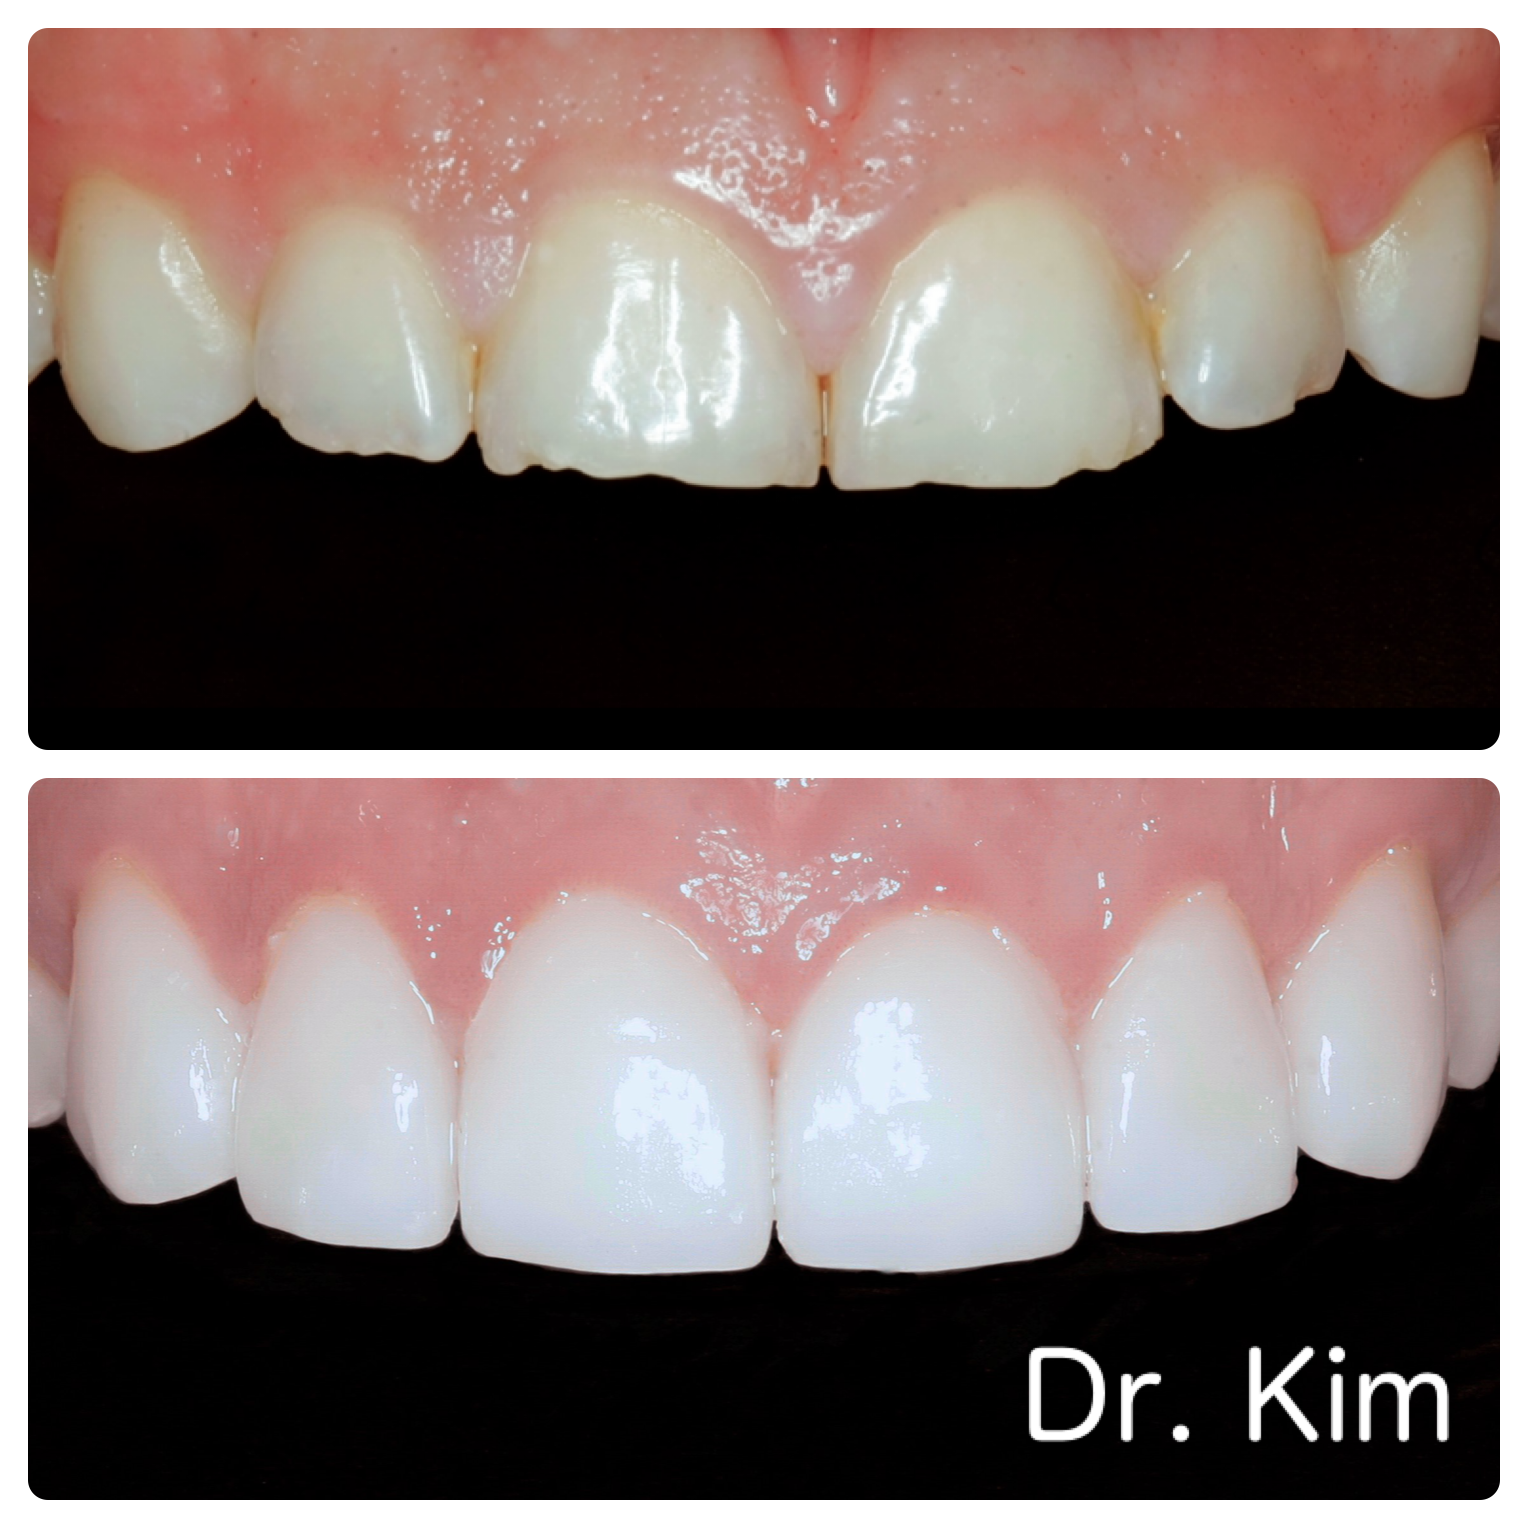 Porcelain crowns due to severe tooth wear